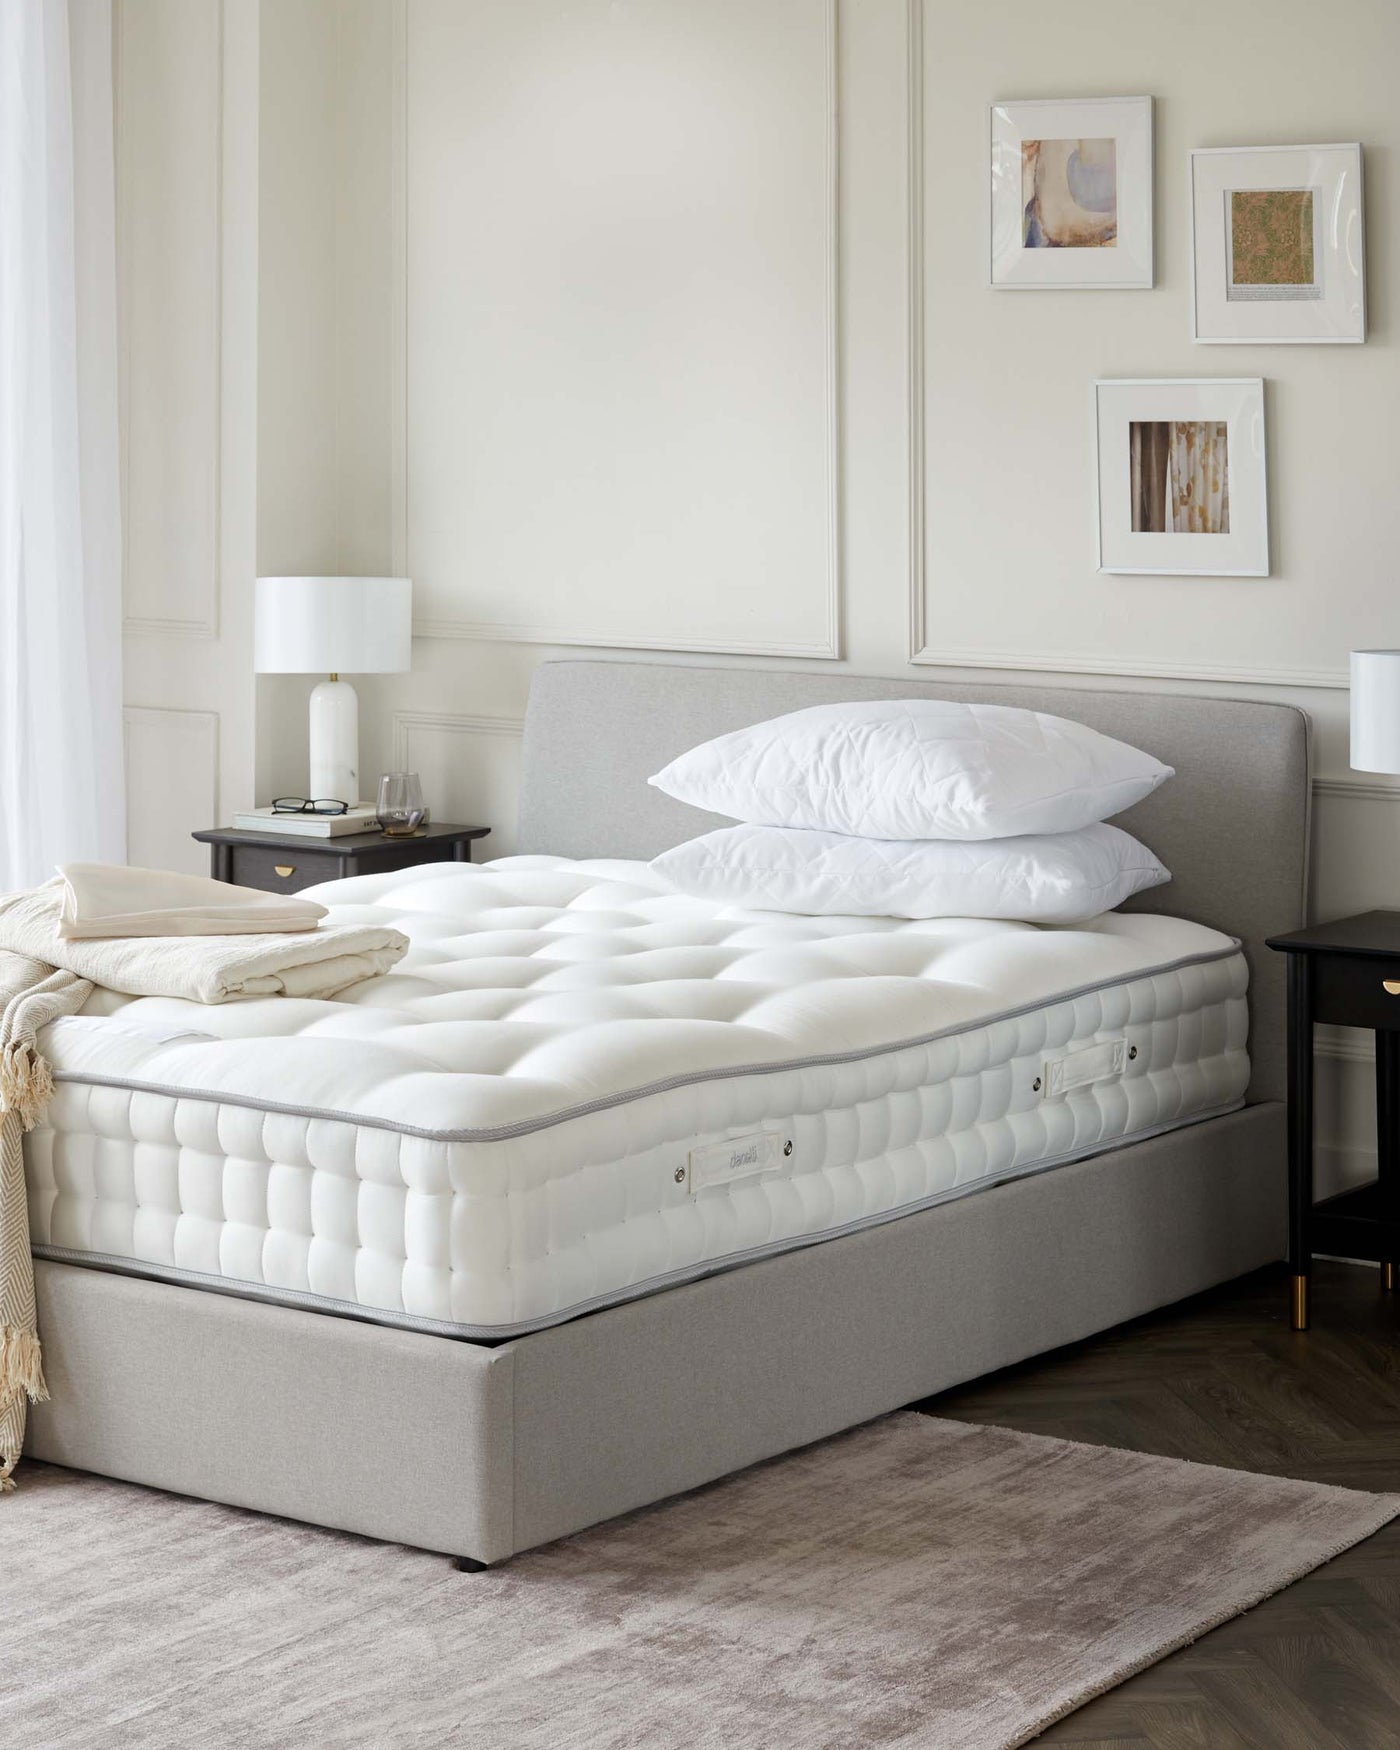 Luxurious upholstered bed with a plush, tufted mattress, complemented by soft white bedding. A sleek nightstand sits adjacent with a modern lamp, nestled within a neutral-toned room accented by elegant wall art and a cosy area rug.